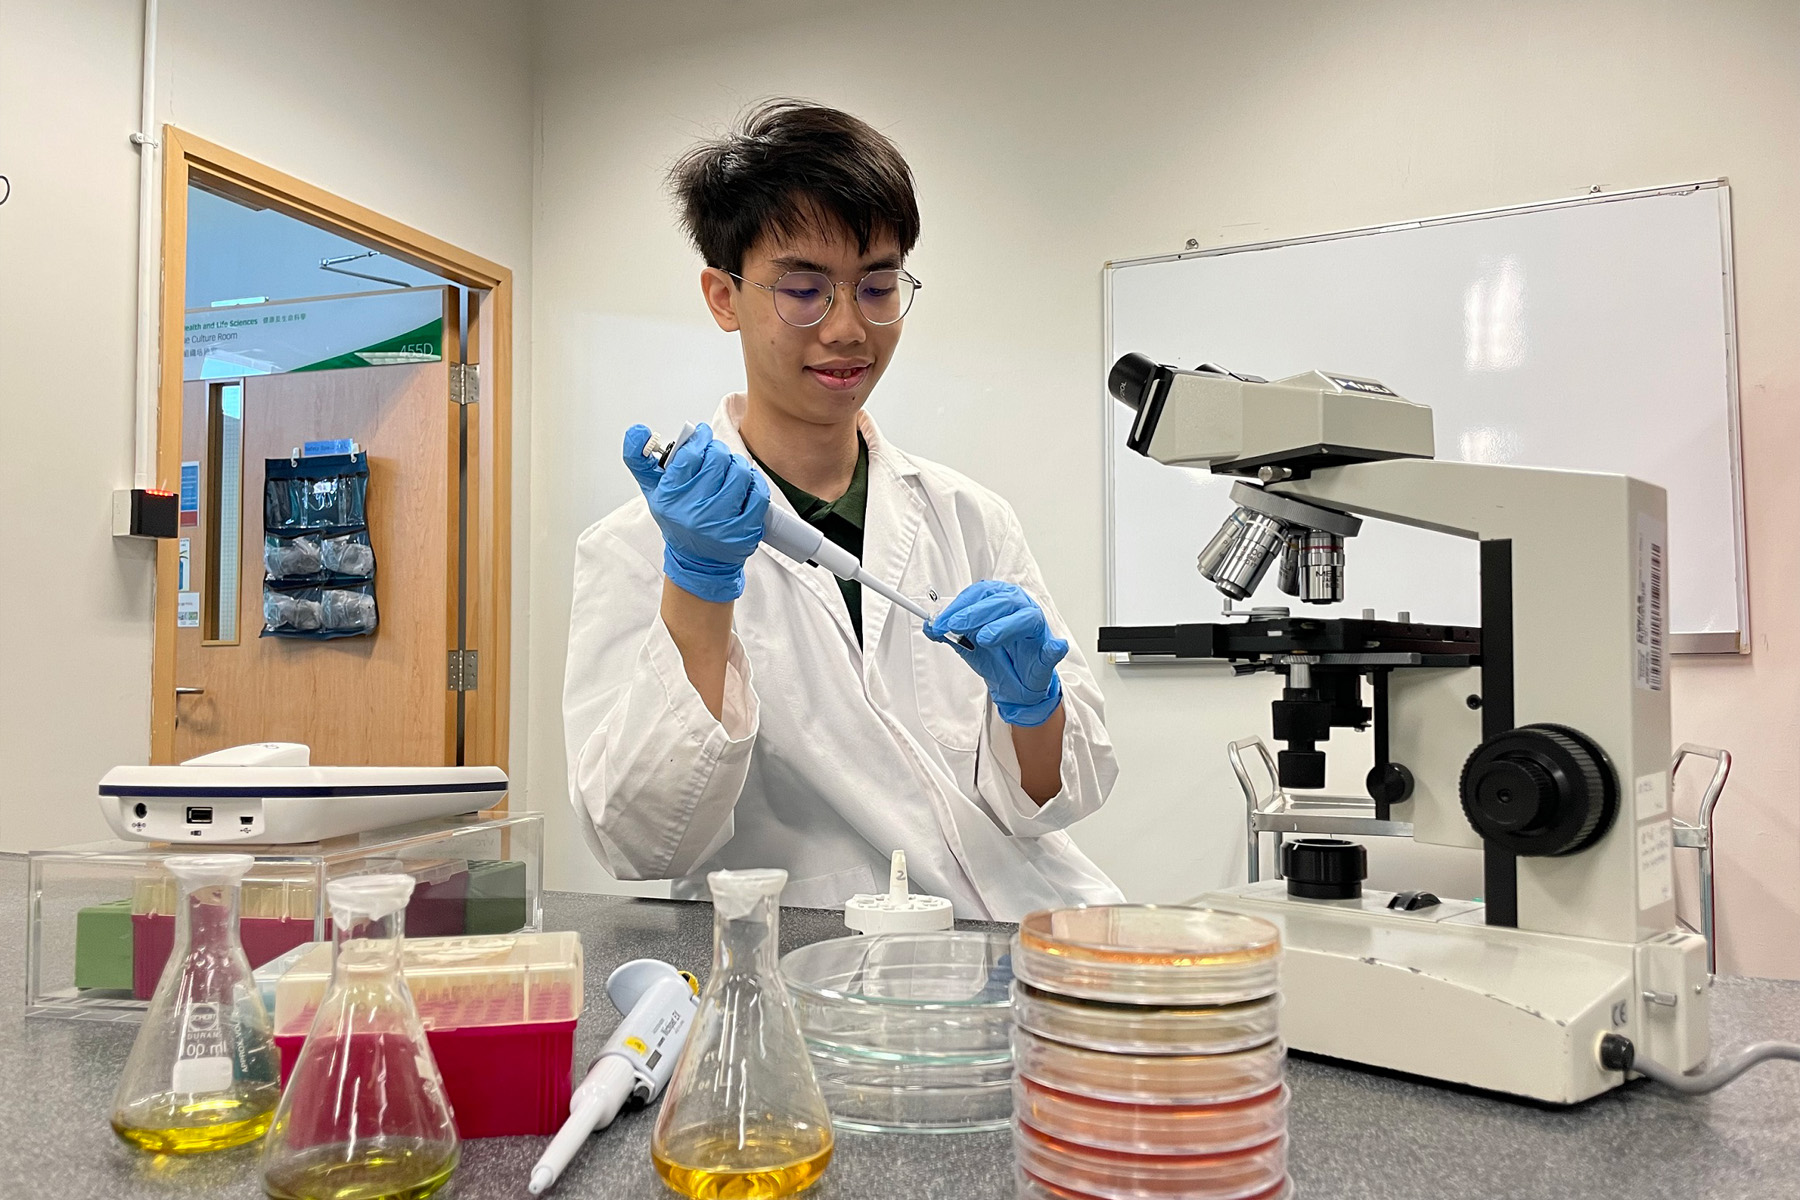 One of the awardees is WONG Chun -fai, who graduated from the Higher Diploma in Biotechnology with the Hong Kong Institute of Vocational Education (IVE). He gained hands-on experience from working at the Jellyfish Aquarium in a theme park, using aseptic techniques learnt at IVE to feed and take care of the jellyfish